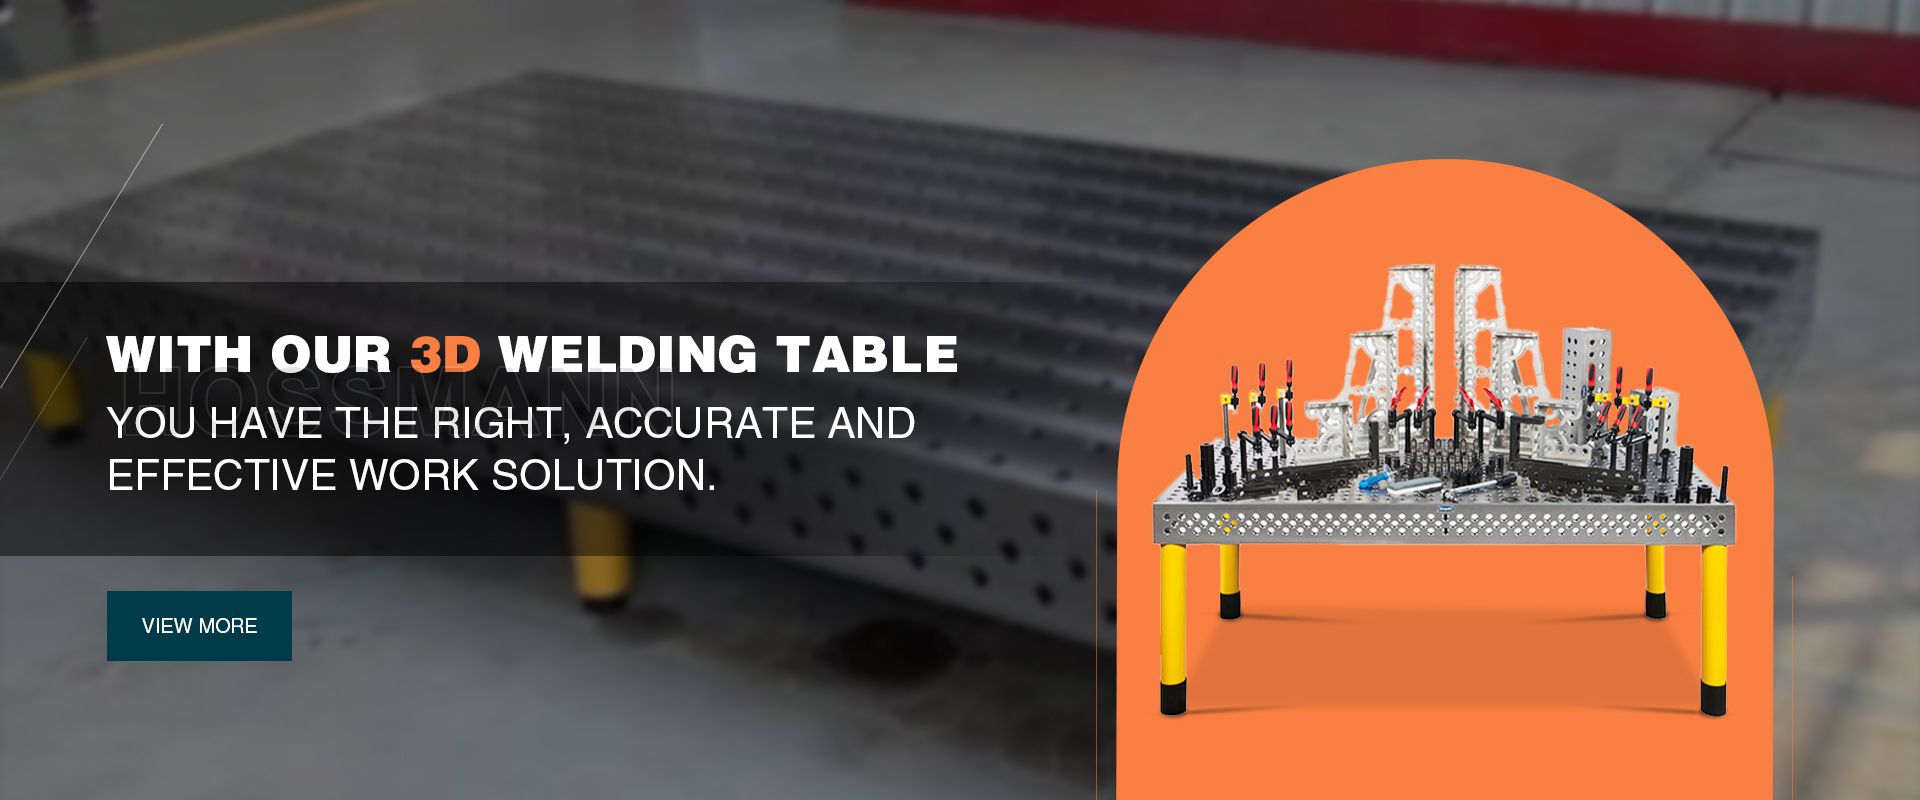 3D Welding Table With Grid